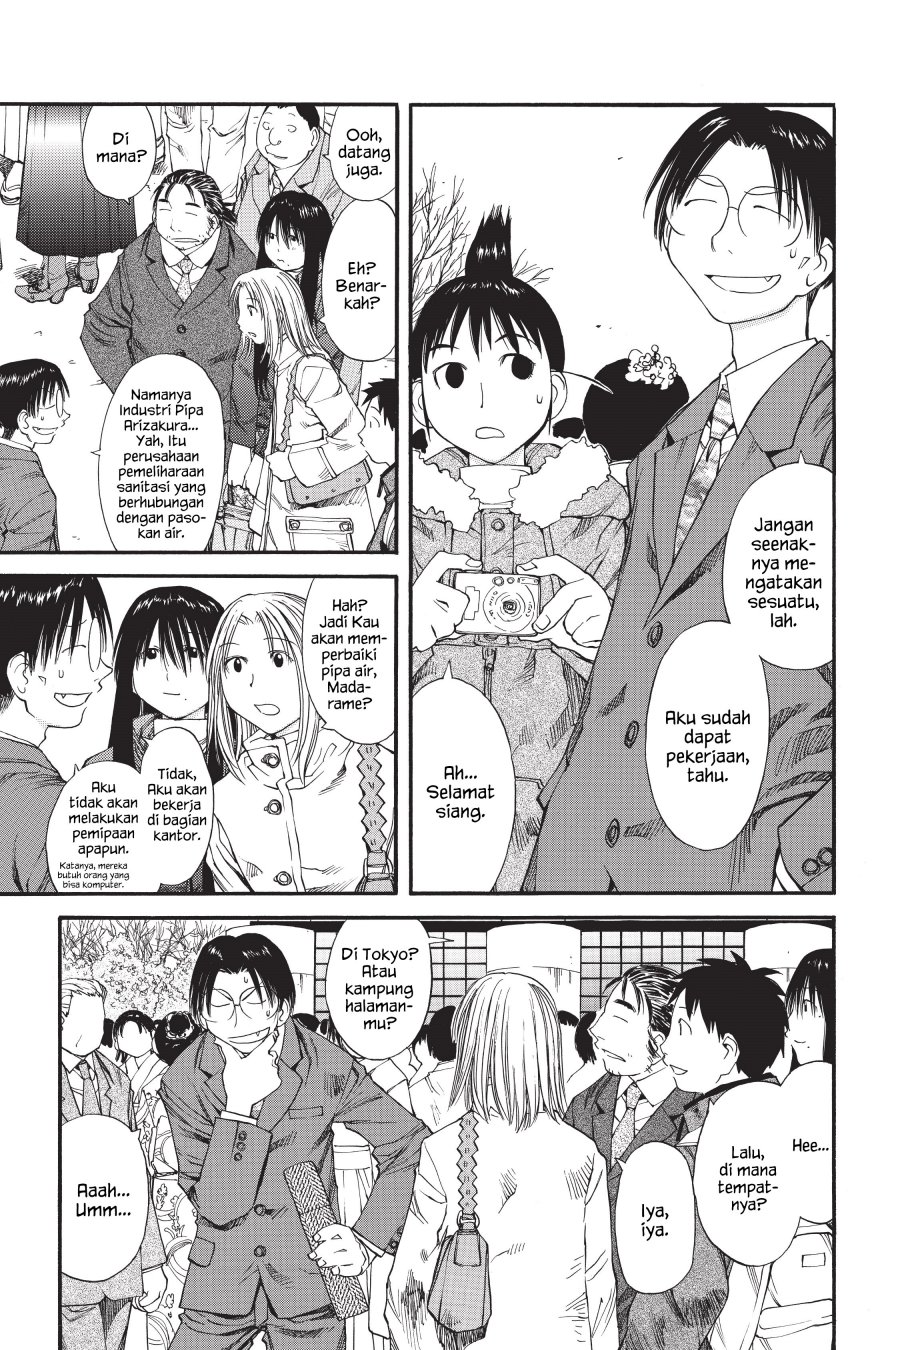 Genshiken – The Society for the Study of Modern Visual Culture Chapter 36 Image 20